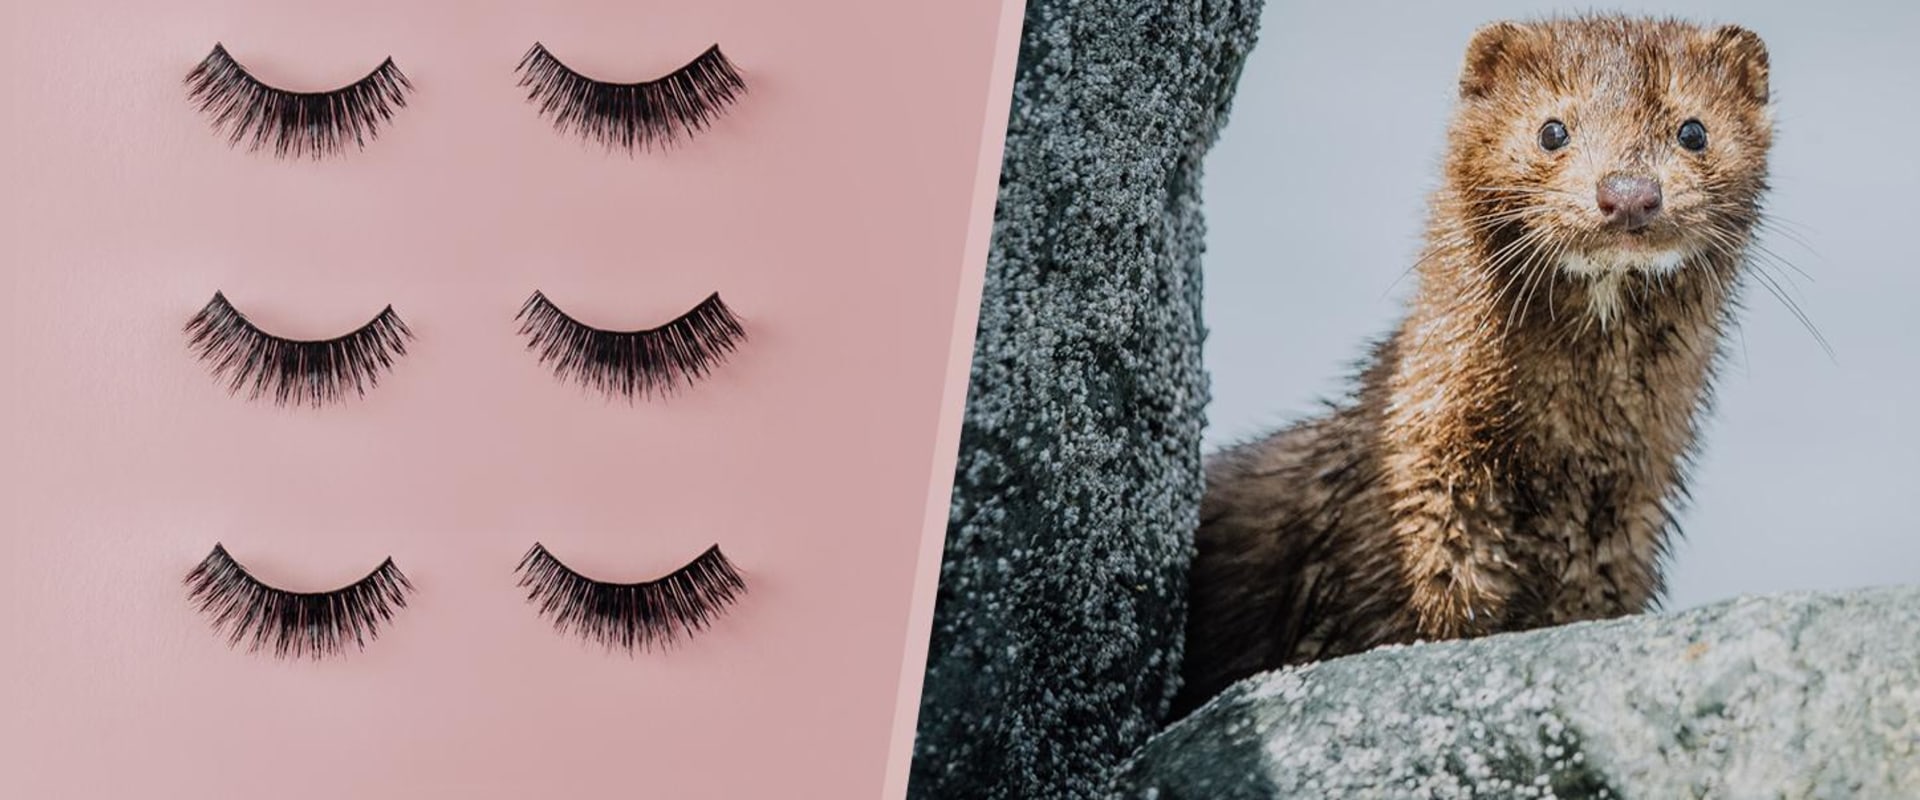 What are eyelash extensions made out of?